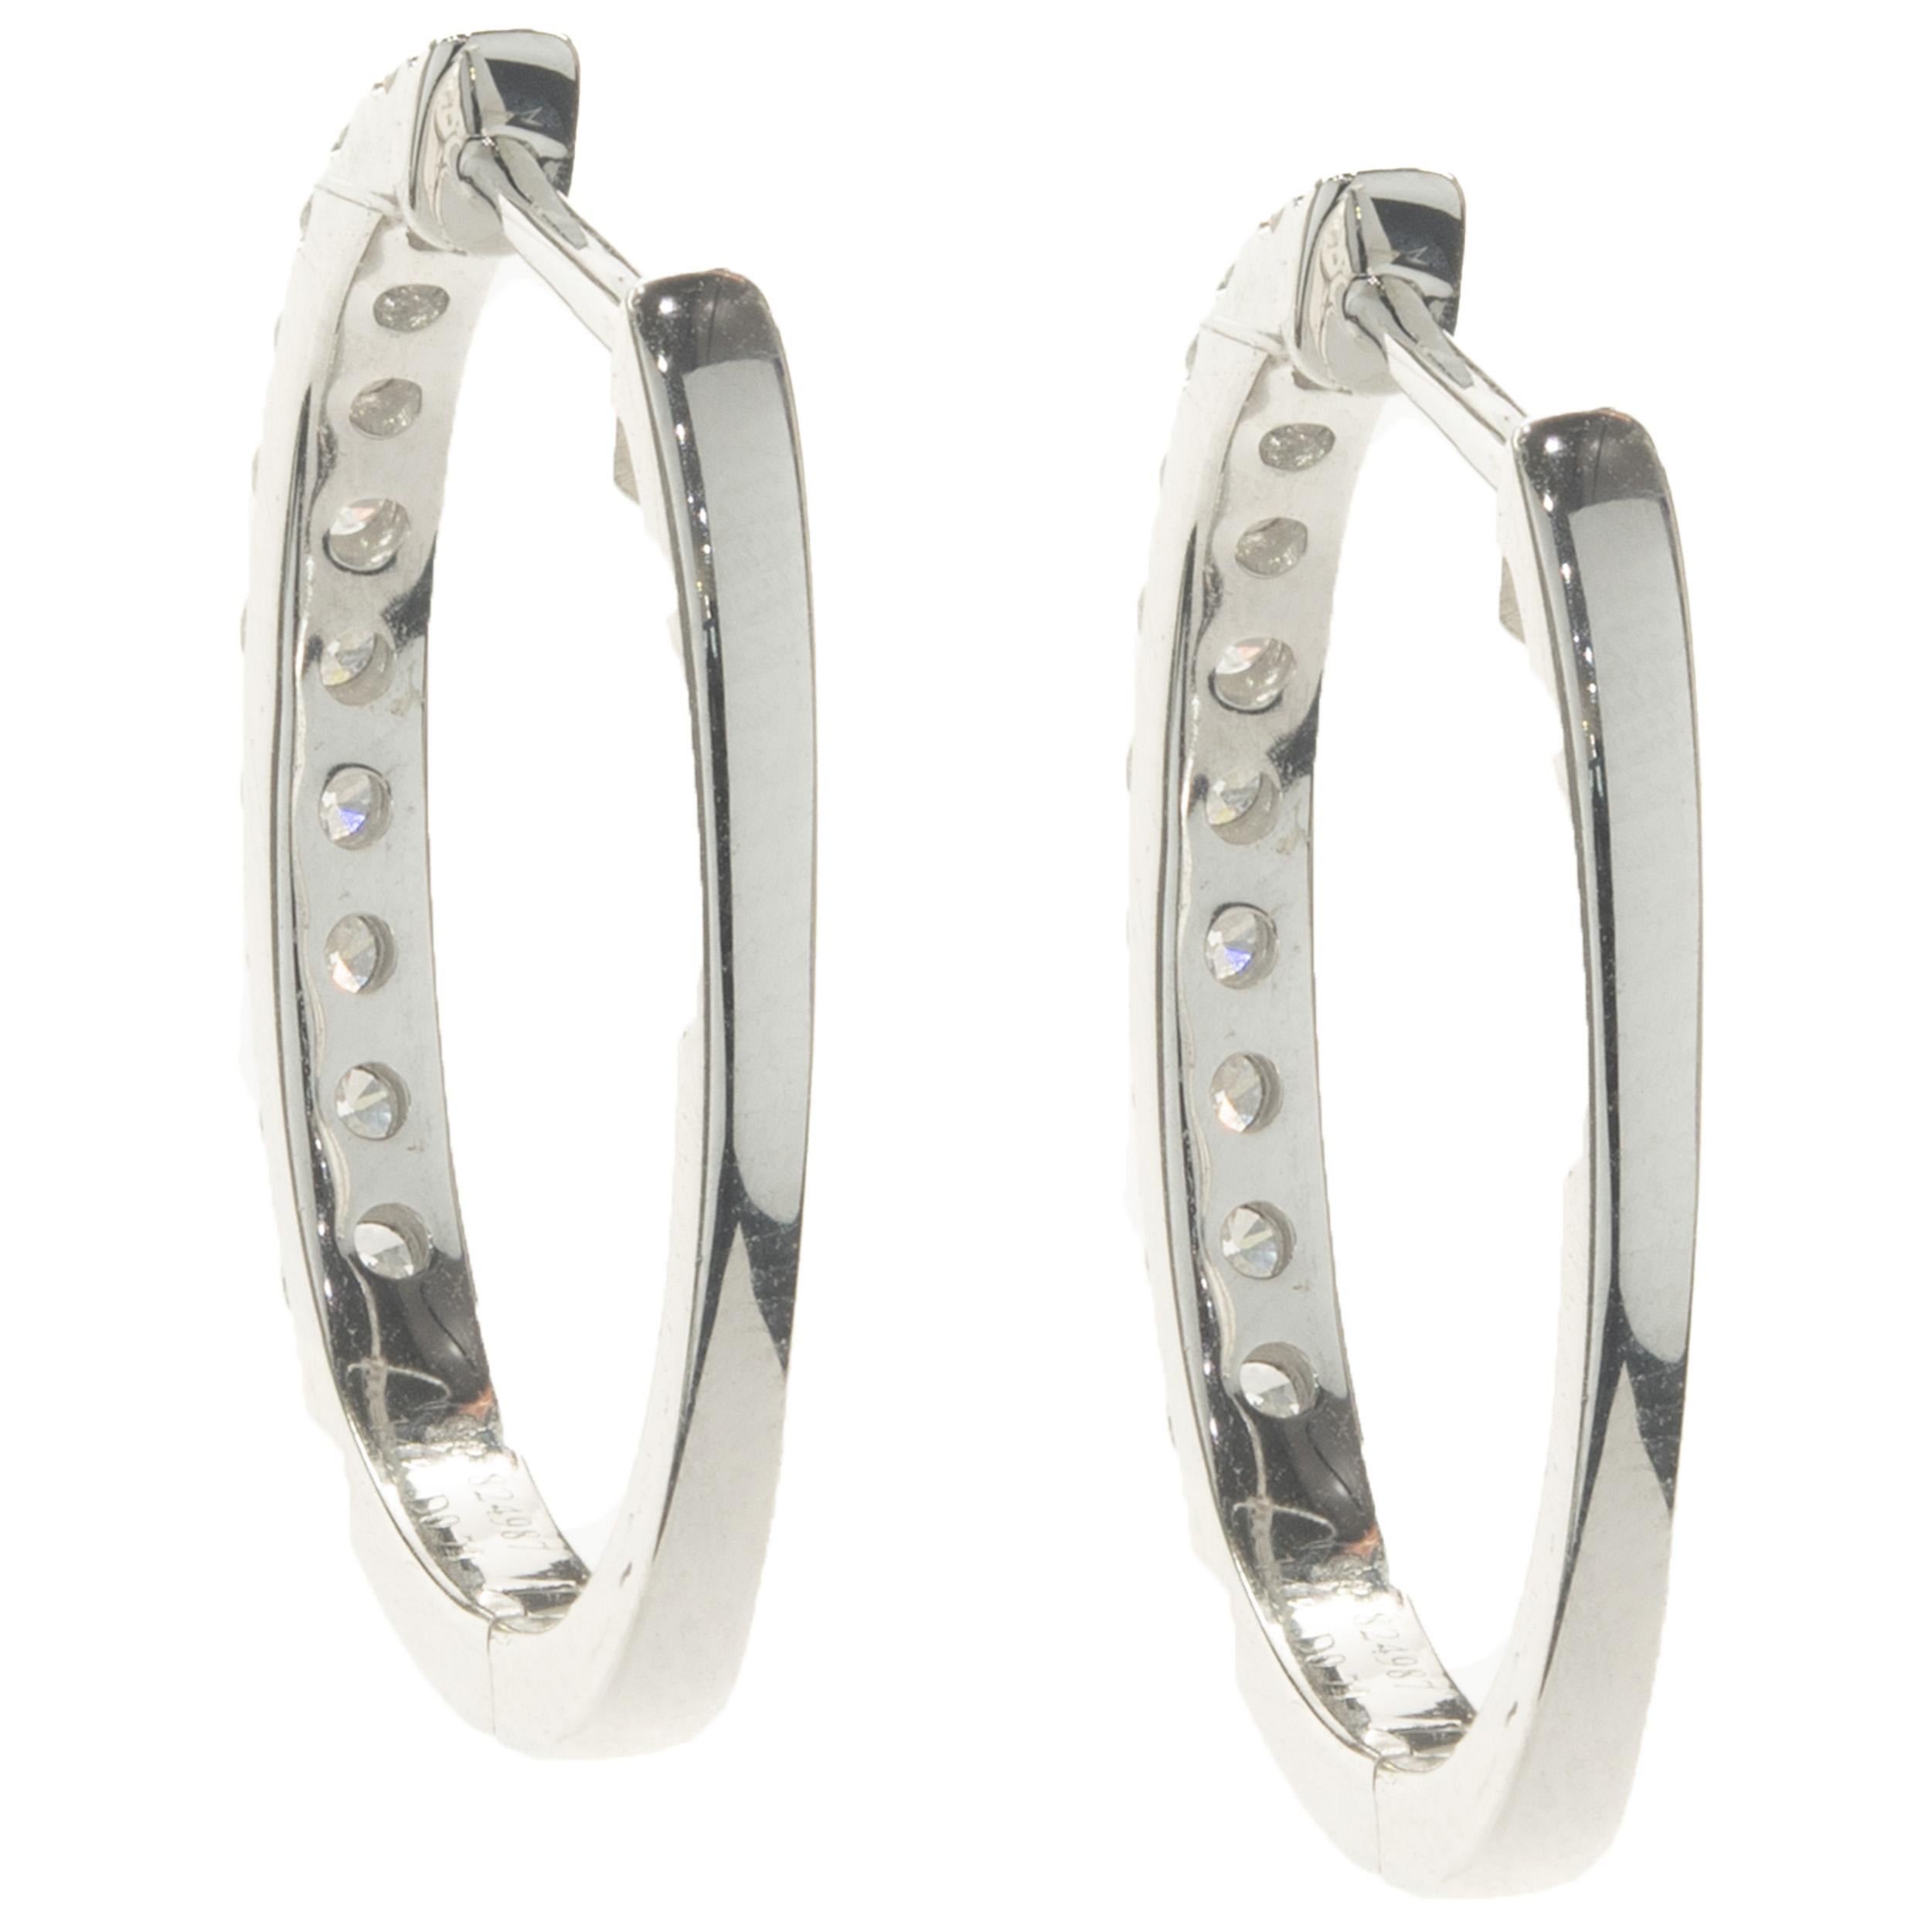 Designer: custom design
Material: 14K white gold
Diamonds: 20 round brilliant cut = 0.73cttw
Color: G
Clarity: SI1
Dimensions: earrings measure 22mm long
Weight: 4.07 grams